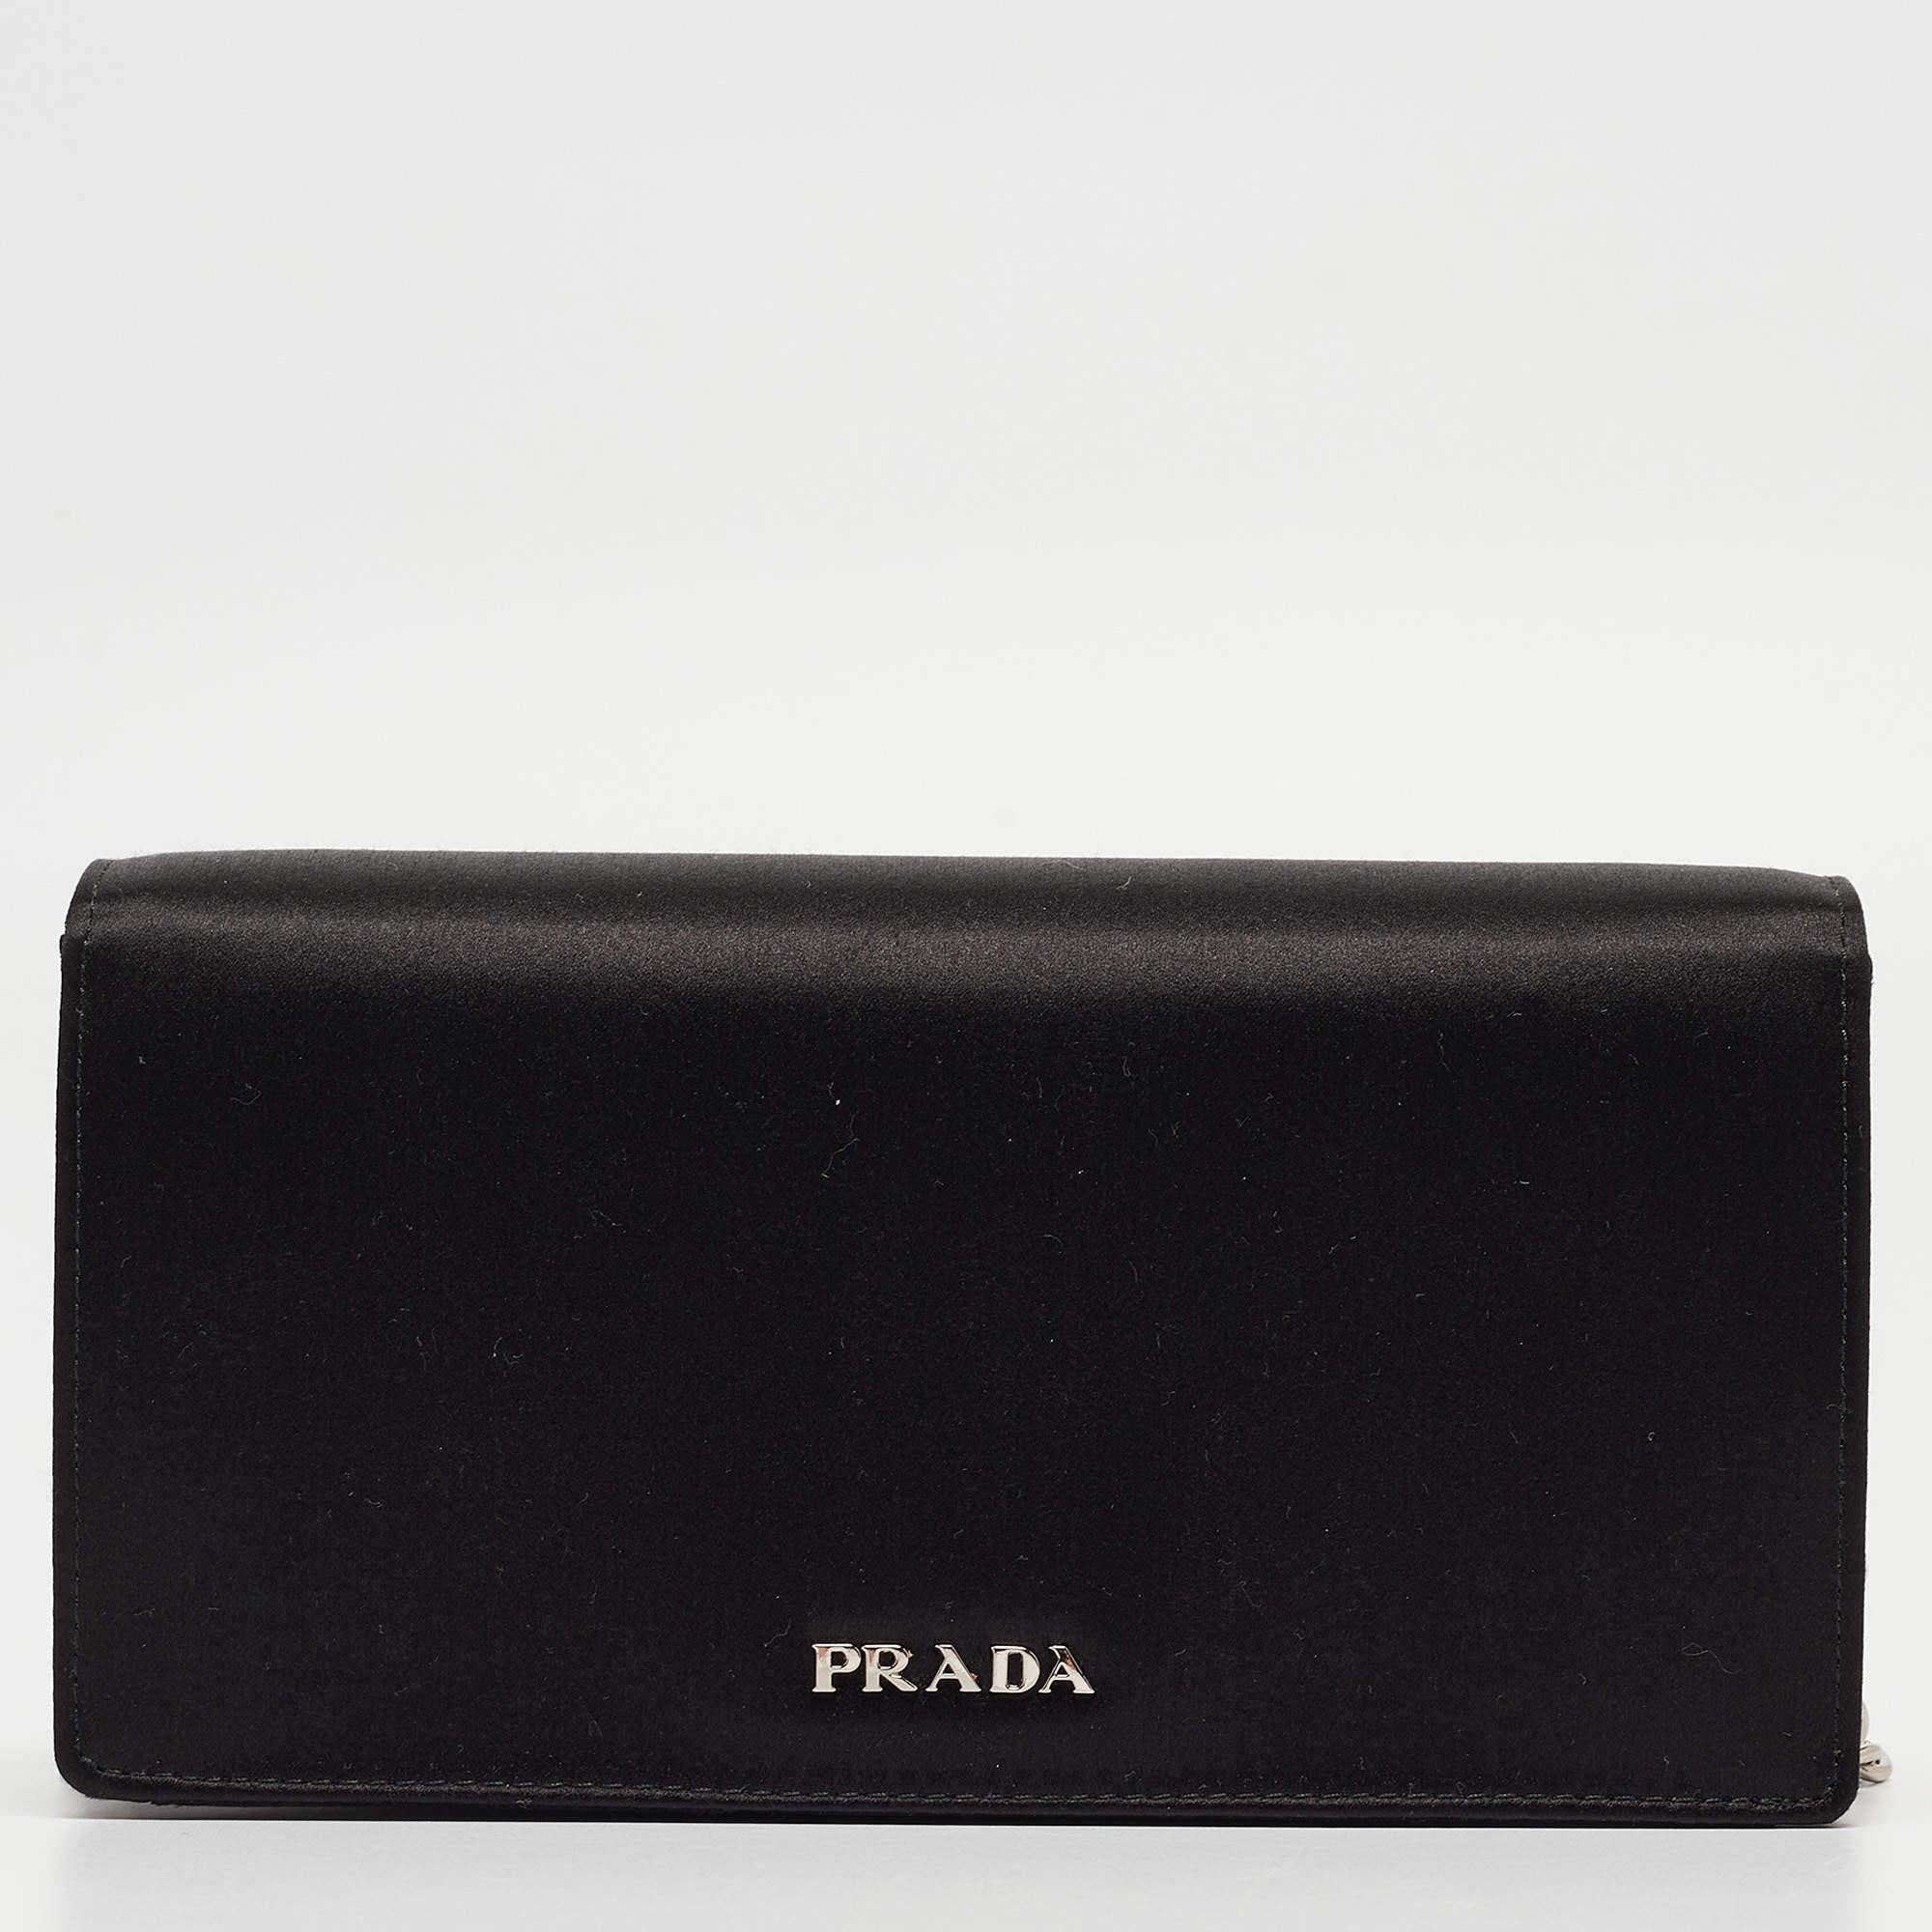 This clutch by Prada will make sure you are equipped to impress when you step out for all your evening events. This bag is crafted from black satin and styled with a front flap embellished with crystals. It has a spacious satin interior, silver-tone